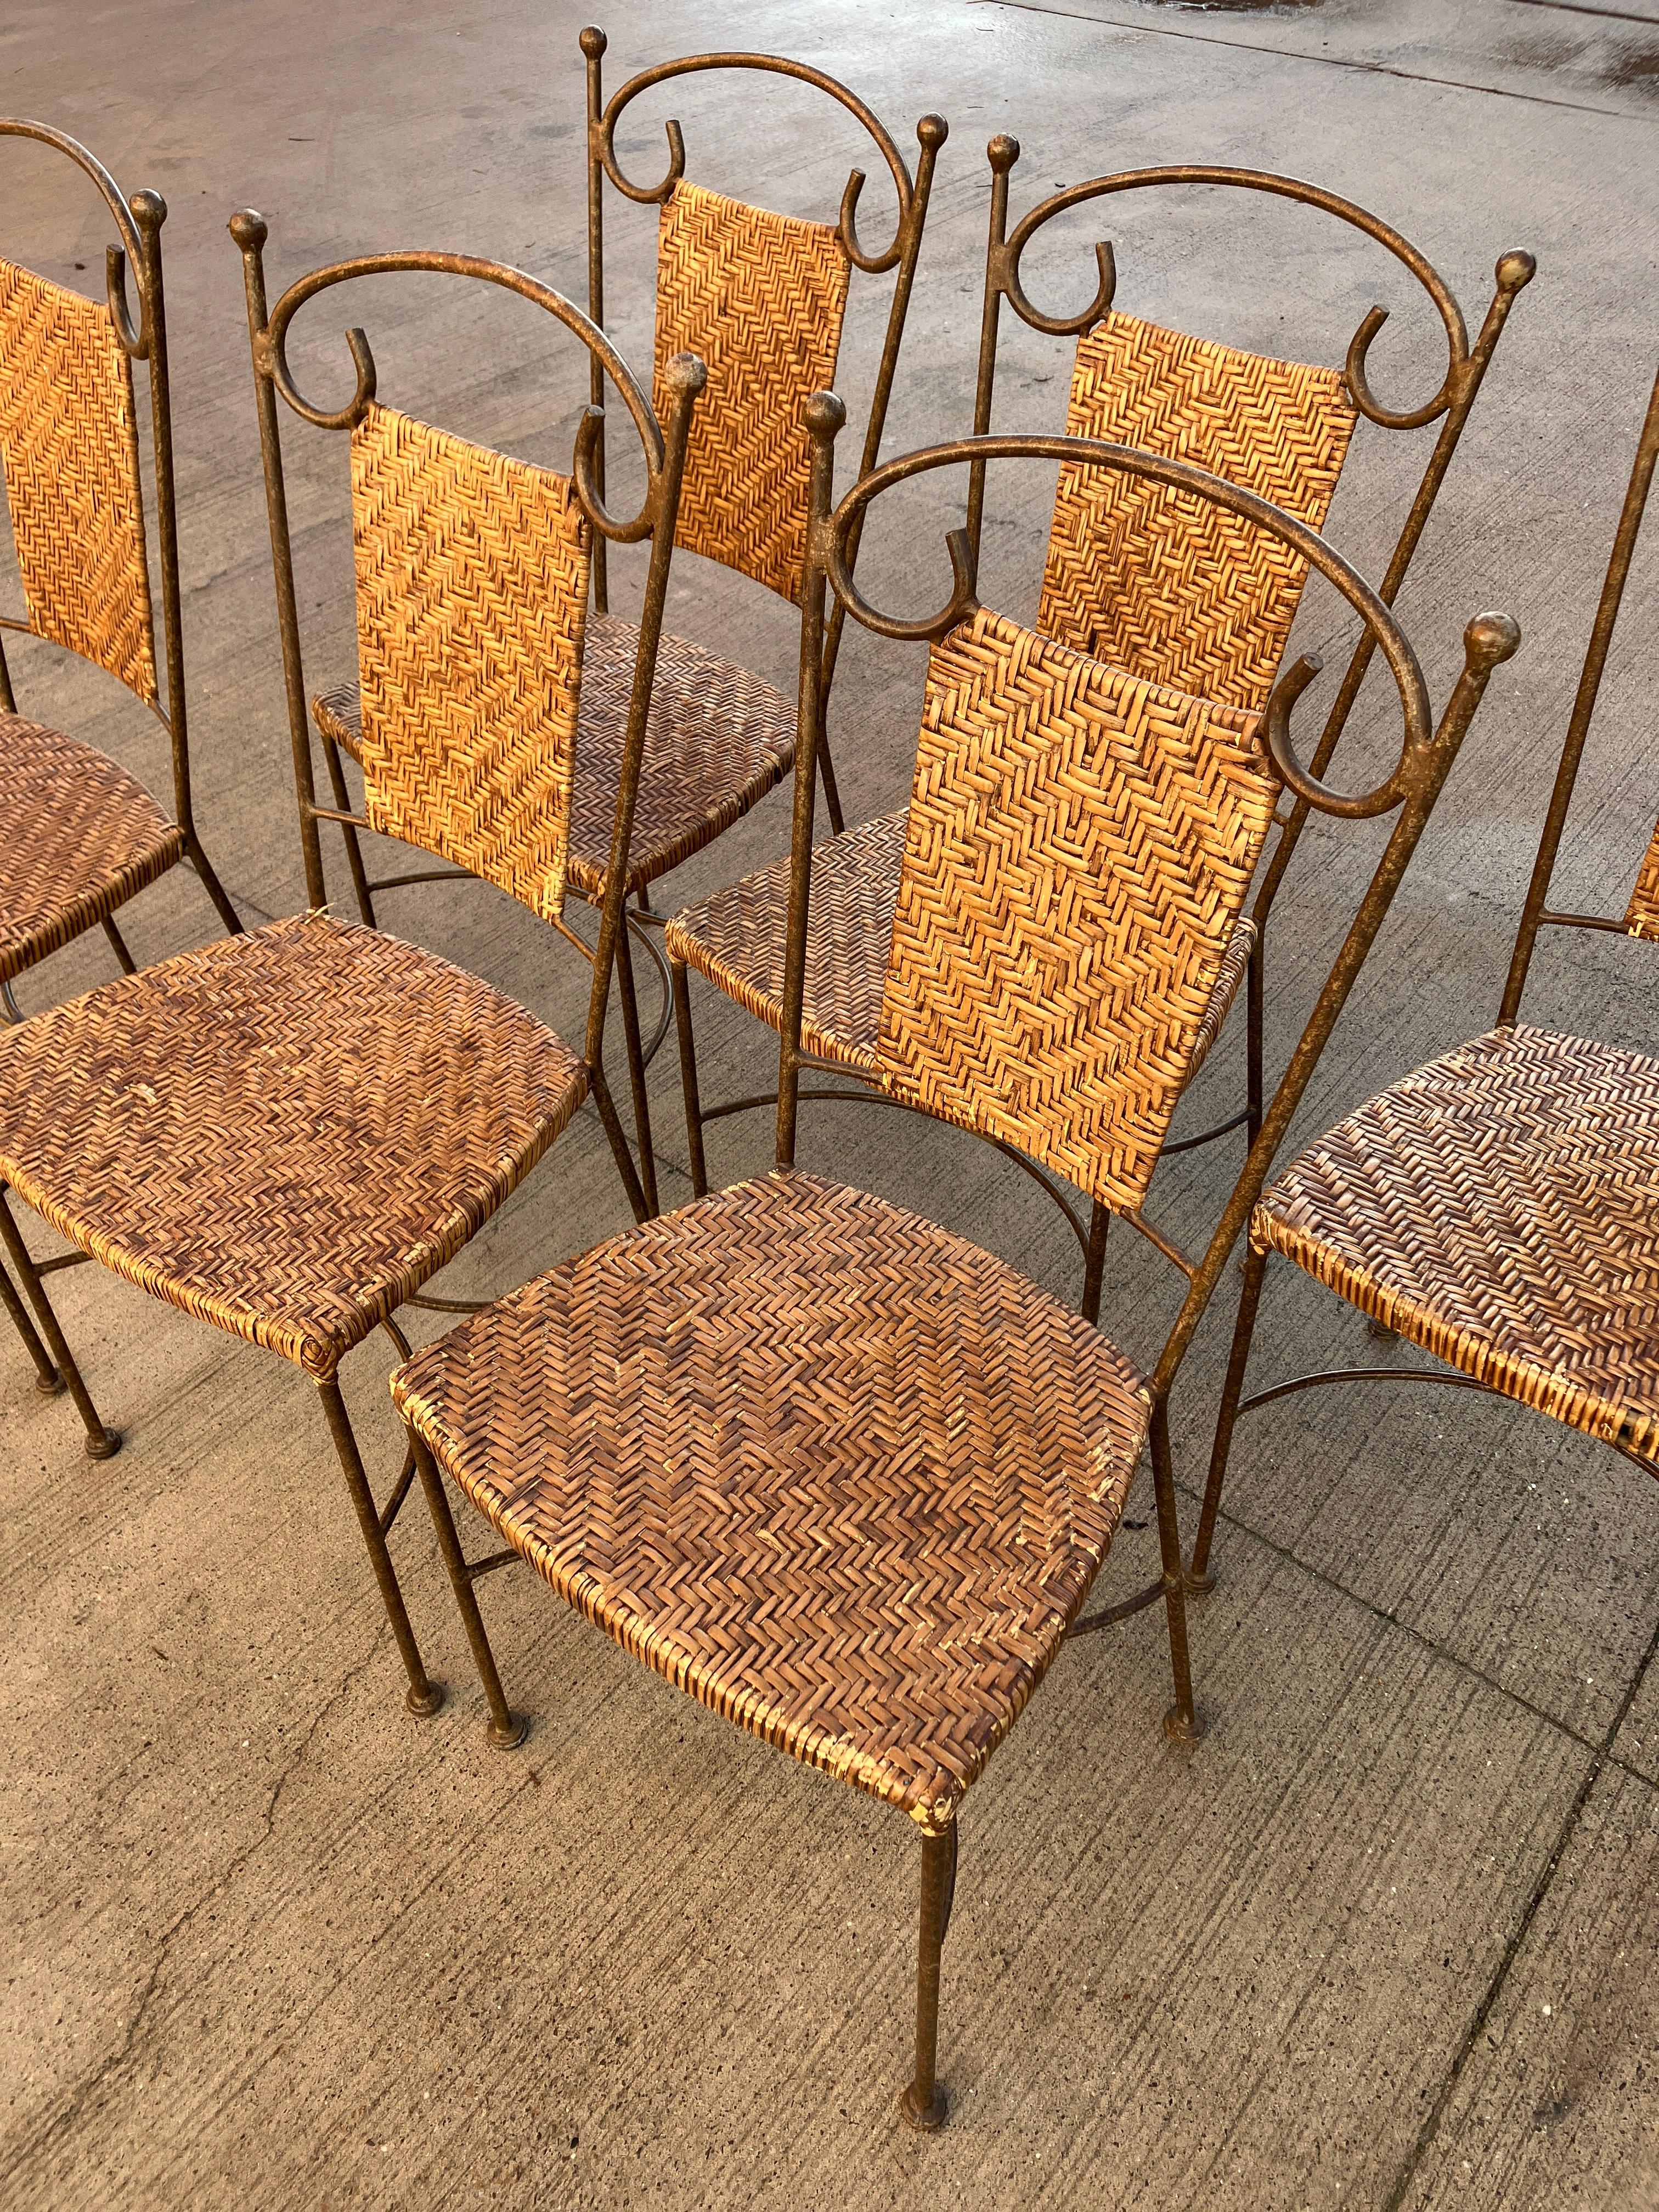 Vintage wrought Iron Dining Chairs with Wicker Seating x 6 For Sale 7